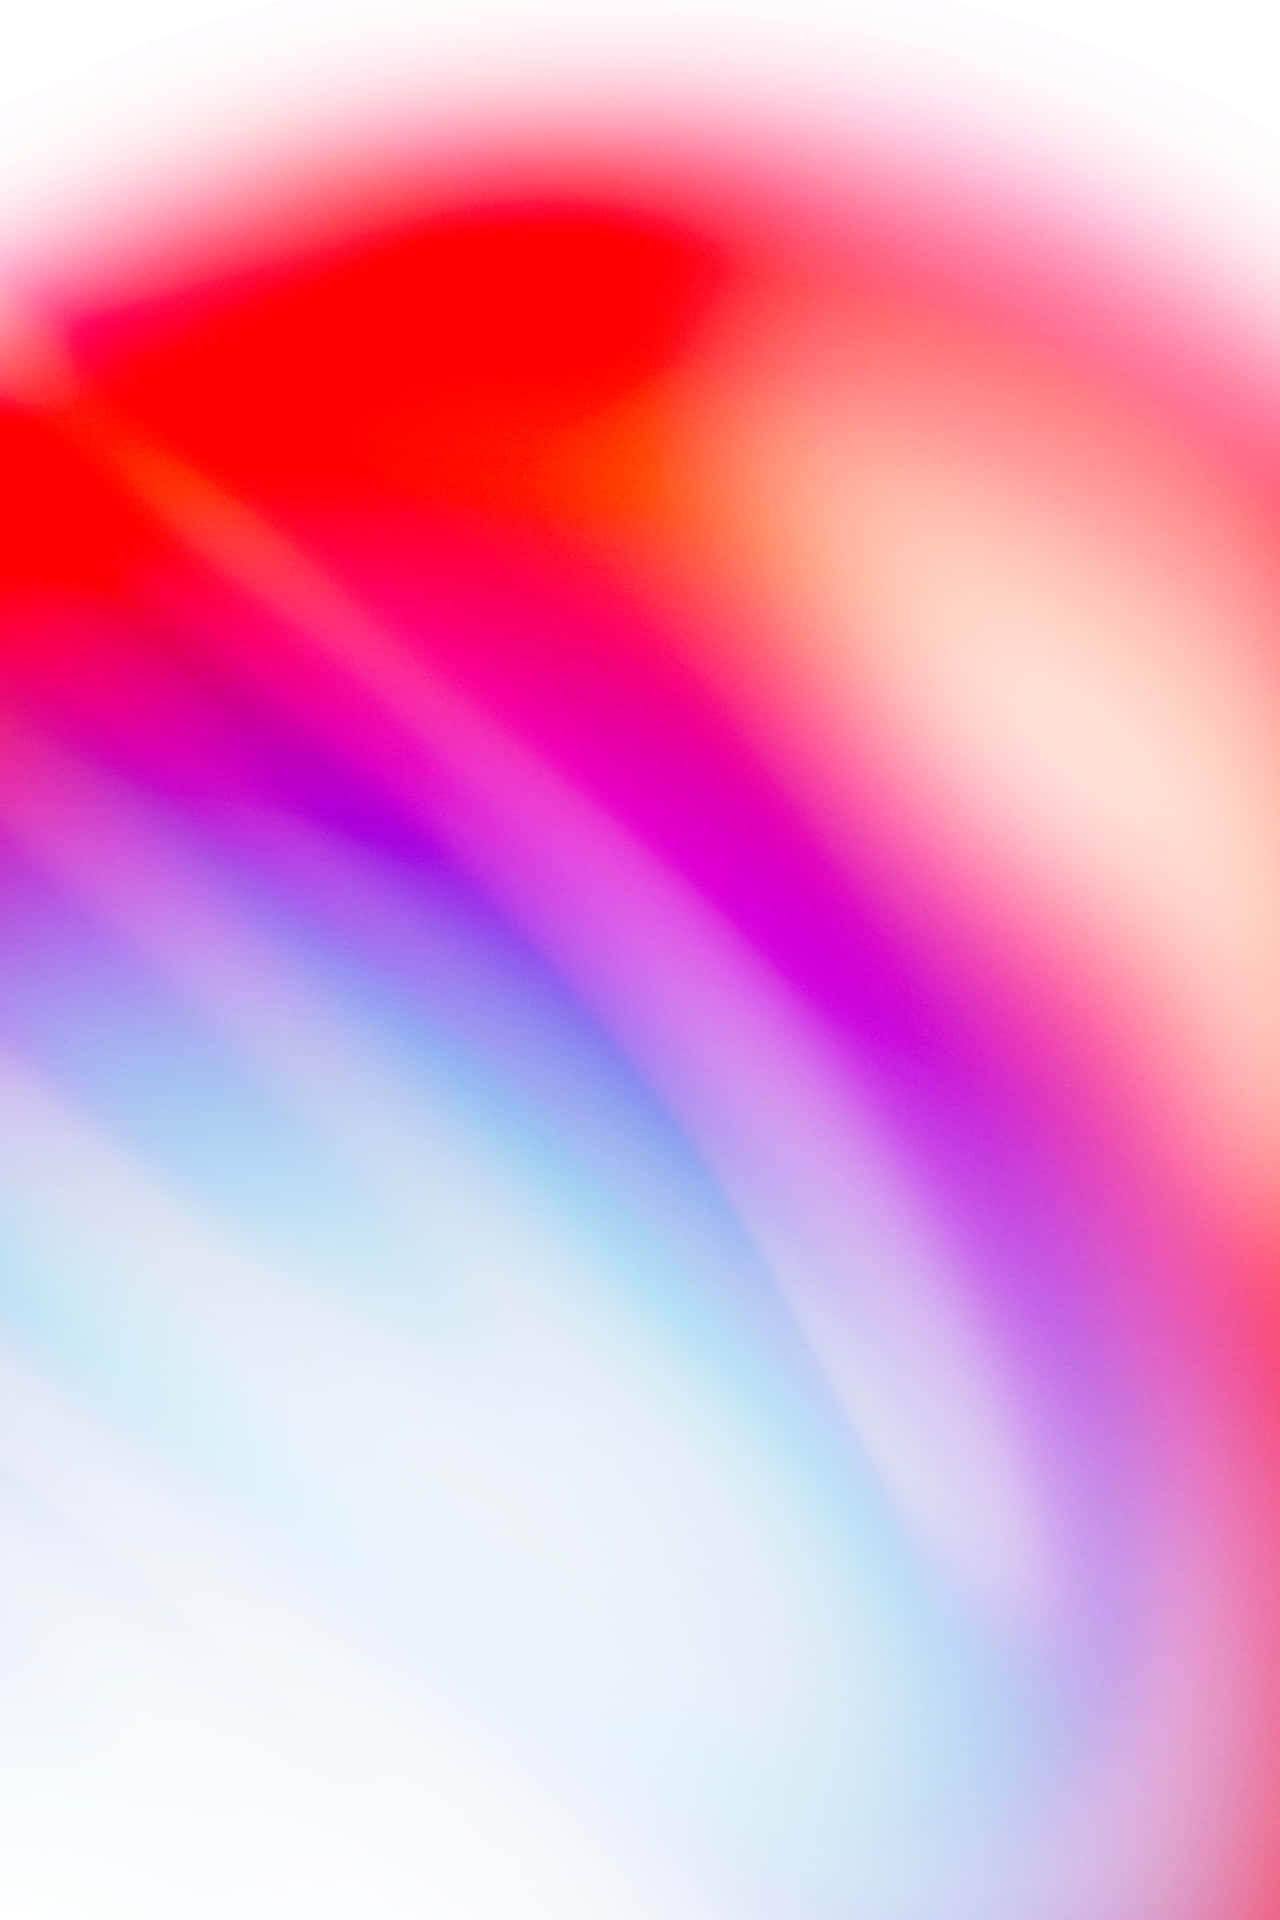 A mesmerizing view of an abstract background